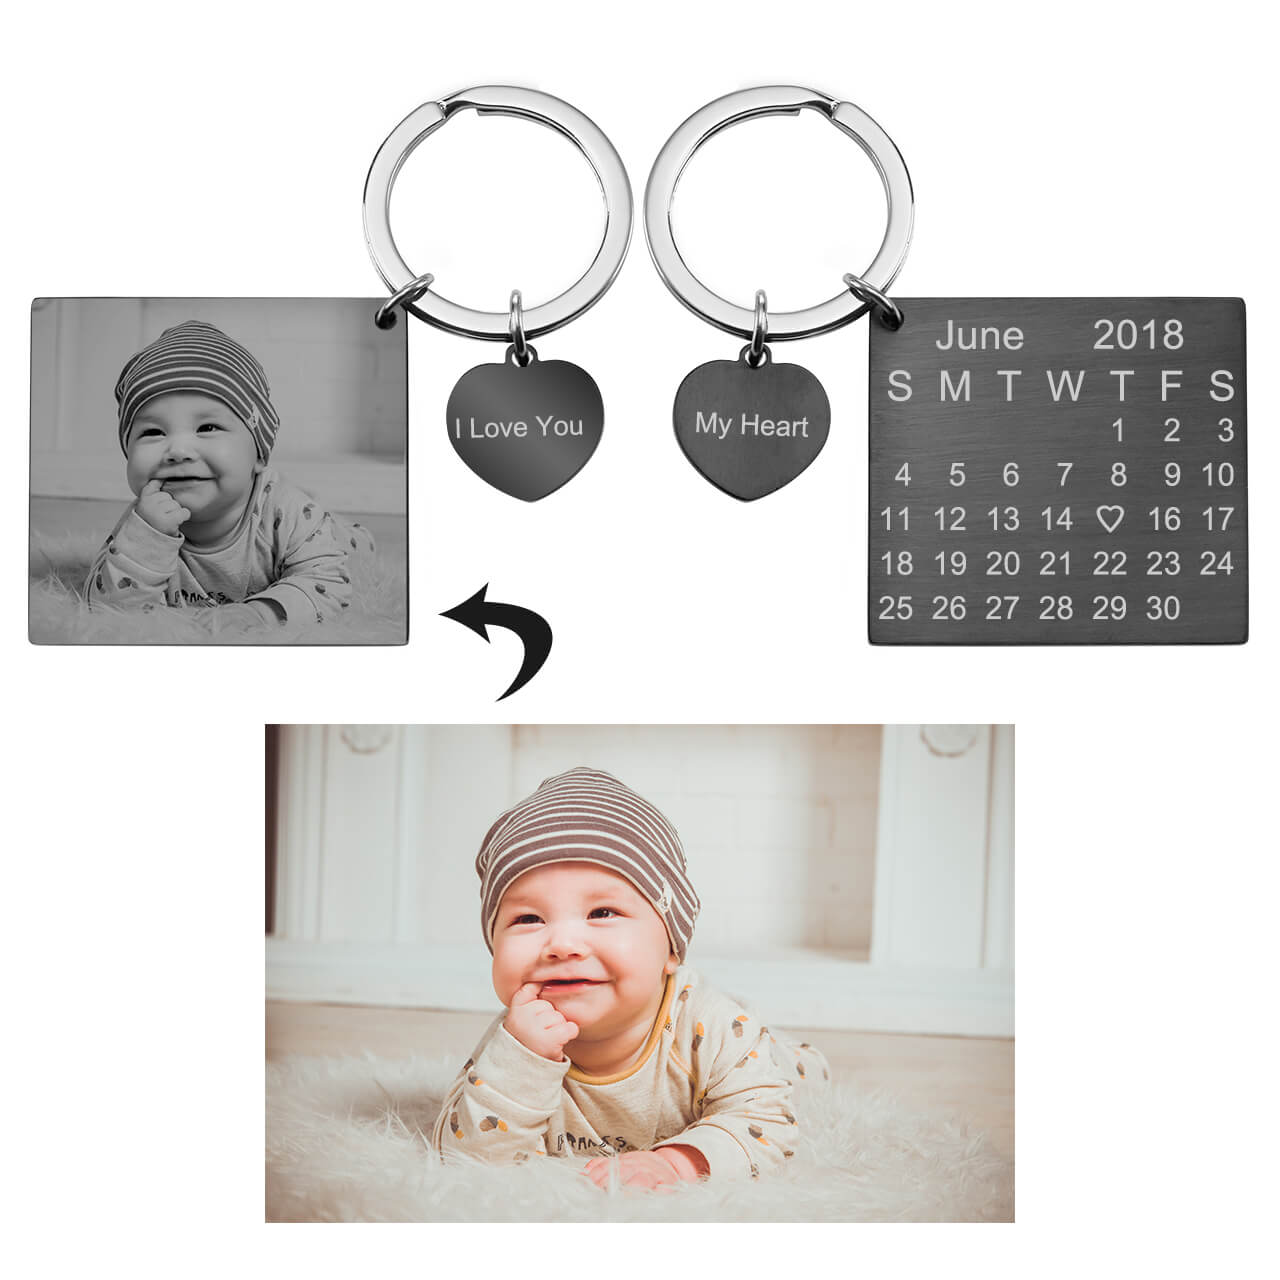 Jovivi personalize photo engrave calendar keychain for your loved one, jnf002705